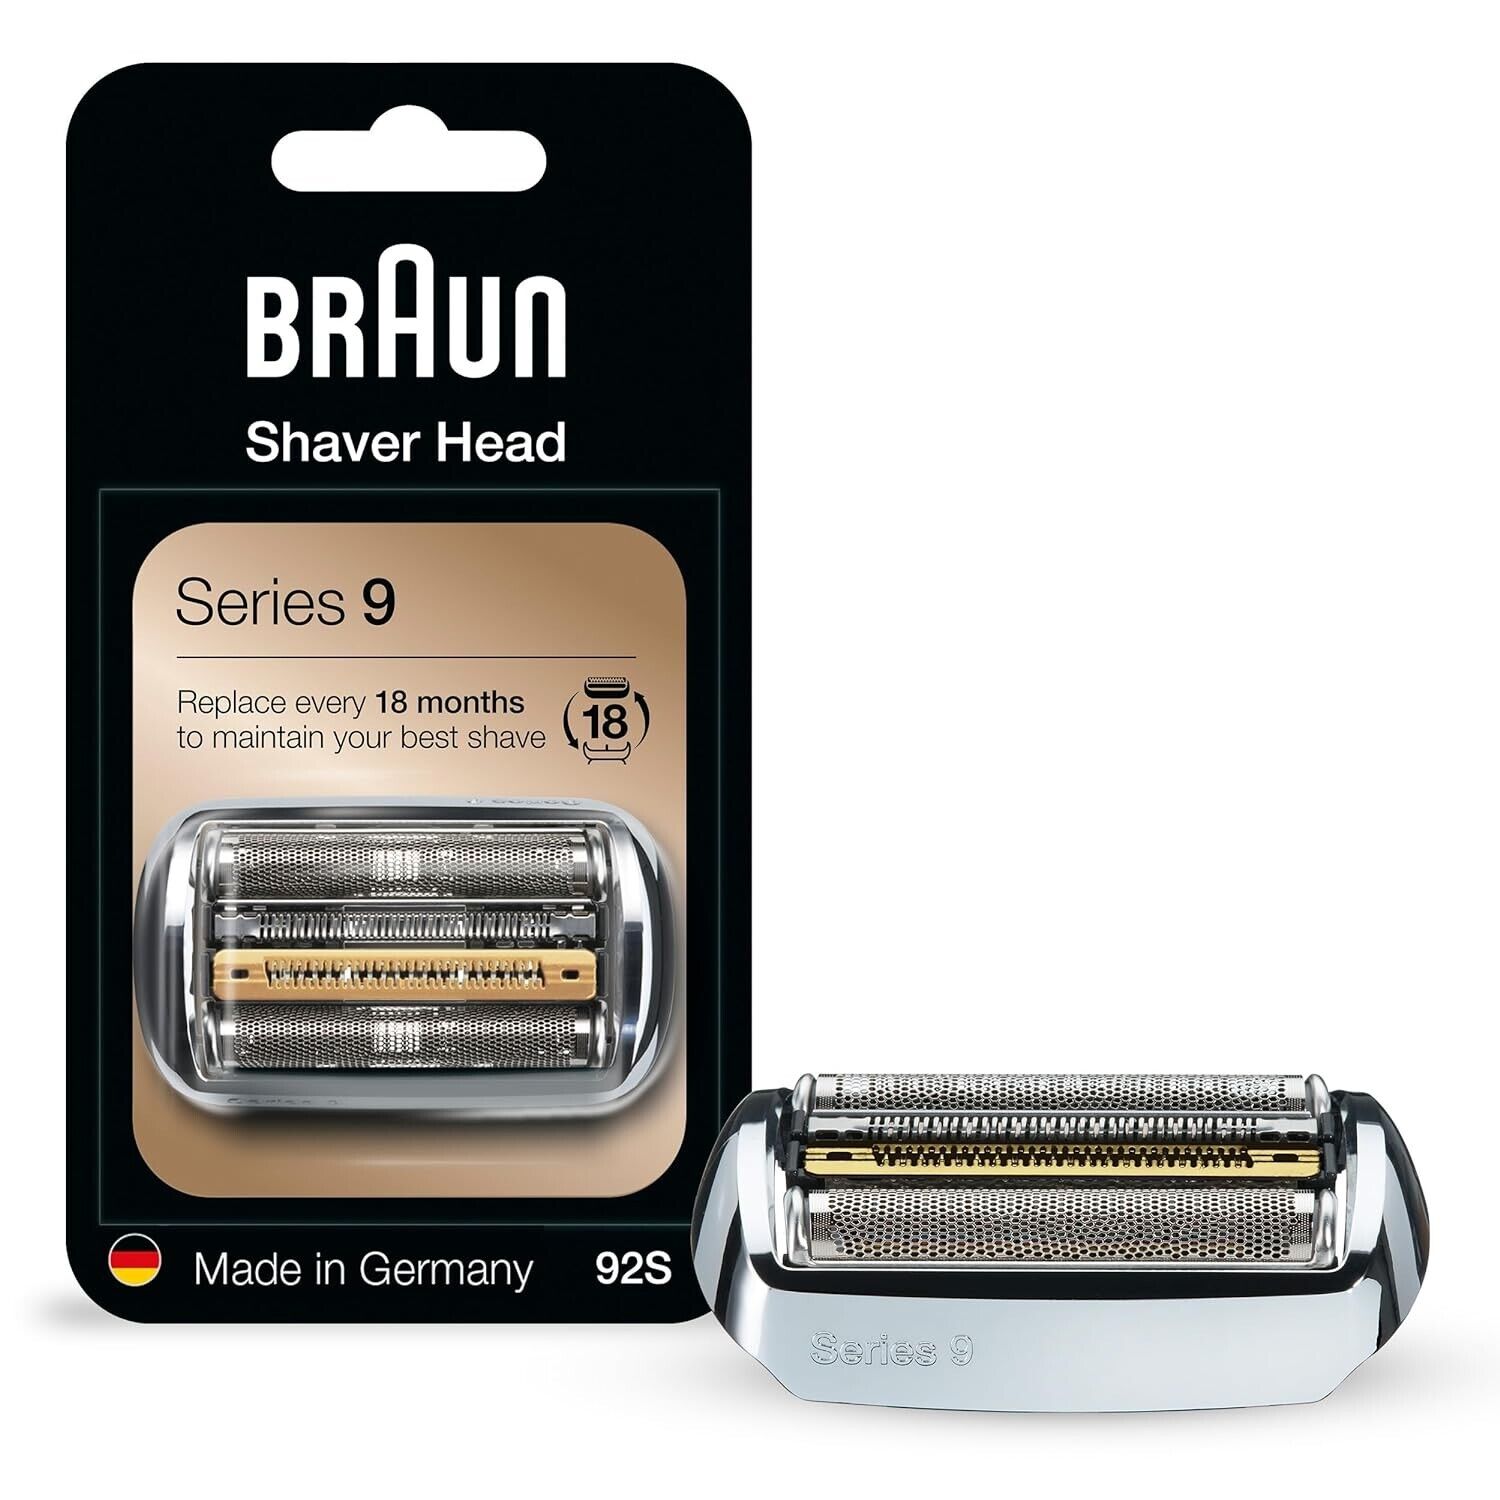 Braun Series 9 Electric Shaver Replacement Head - 92S